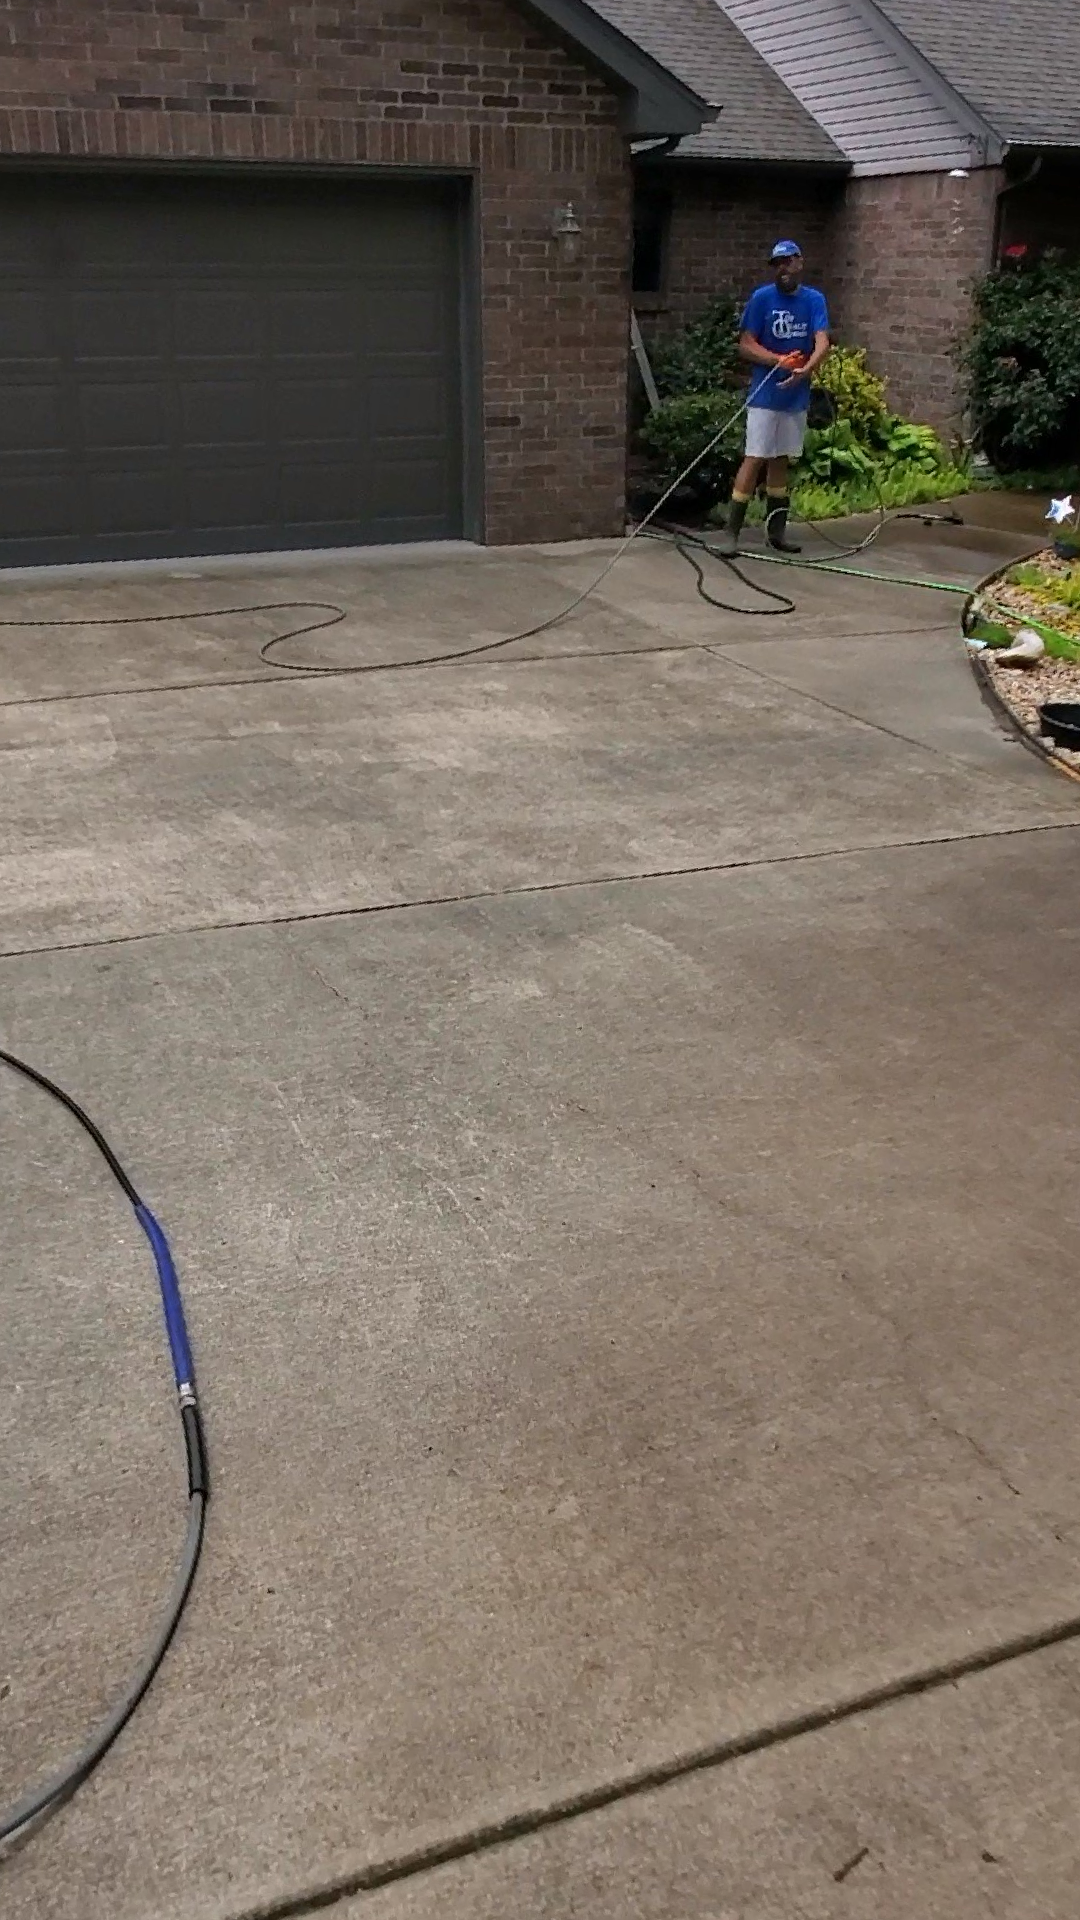 A man is using a pressure washer to clean a driveway in front of a house.